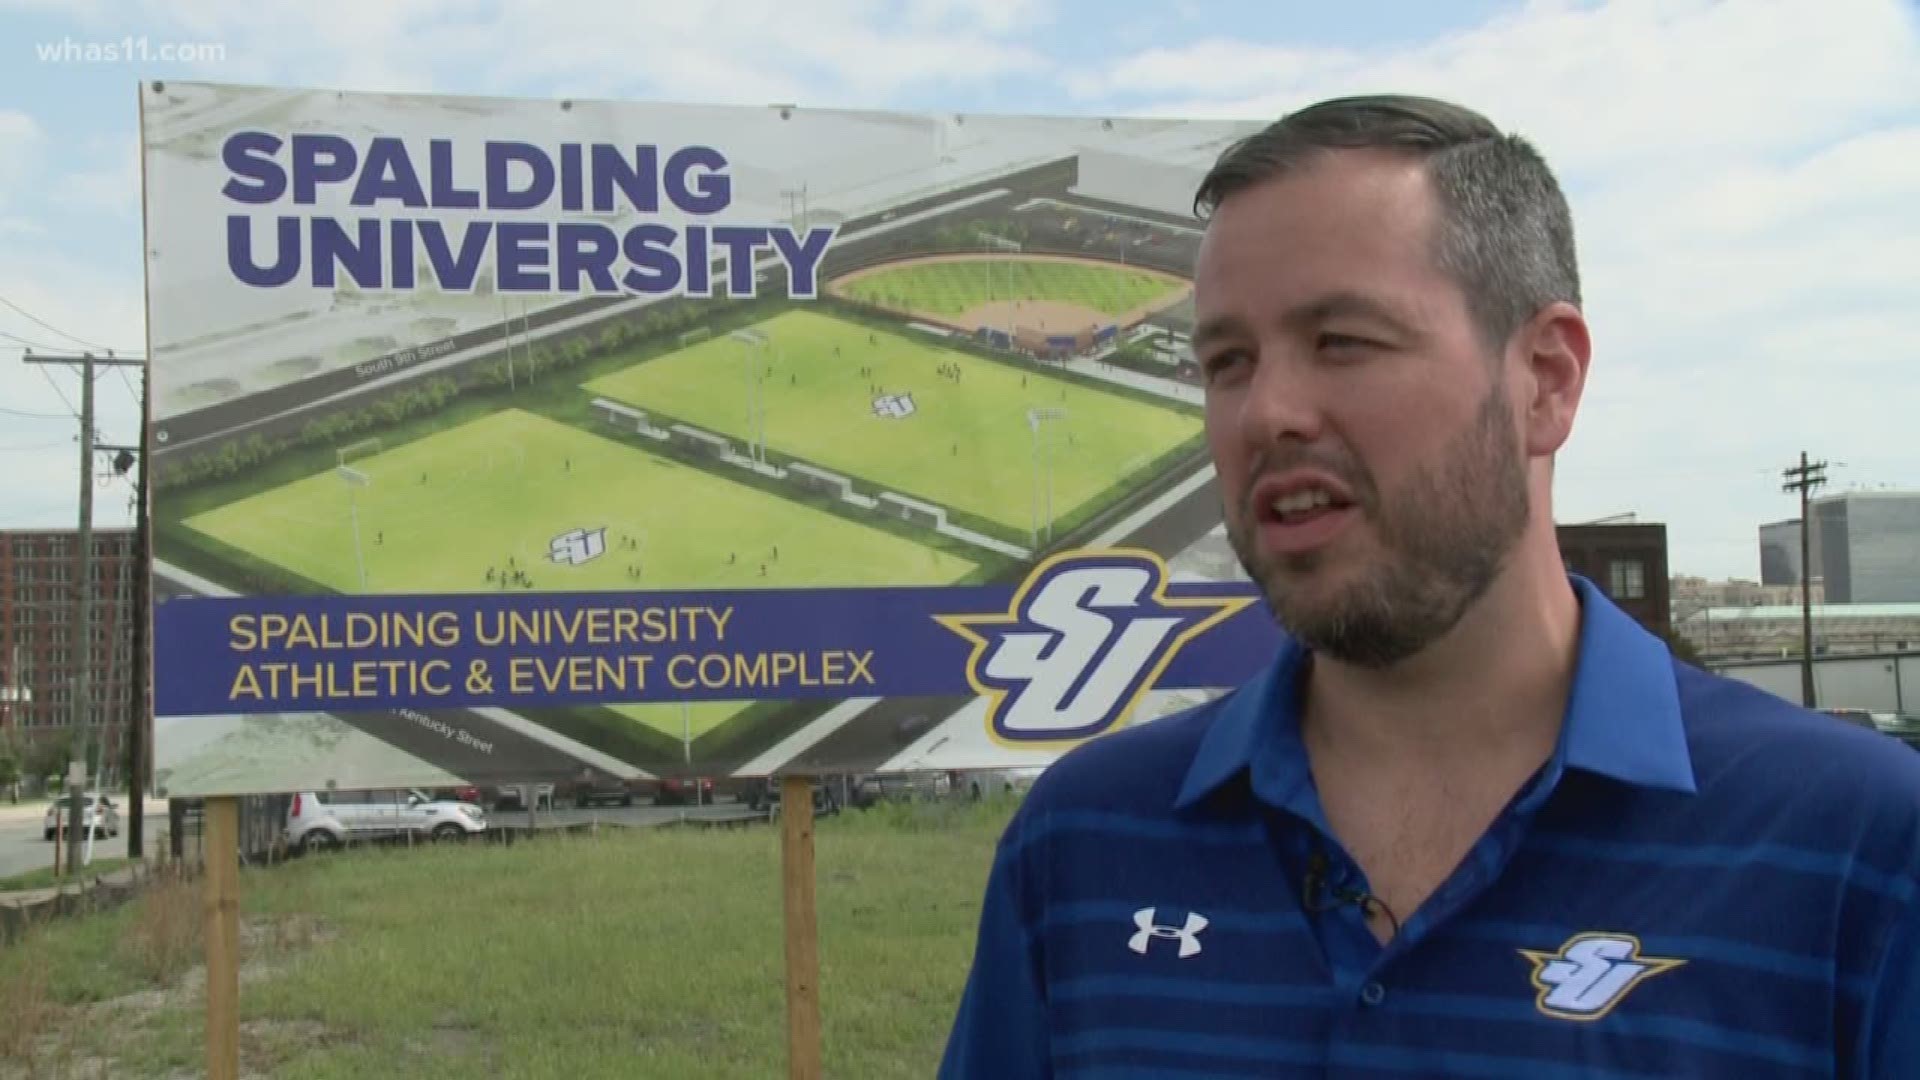 Spalding's student-athletes play without scholarships, and many play for the universtiy without a home field. Now, the school is looking to change that with a new athletic and event complex. The university also hopes this project inspires change for the c